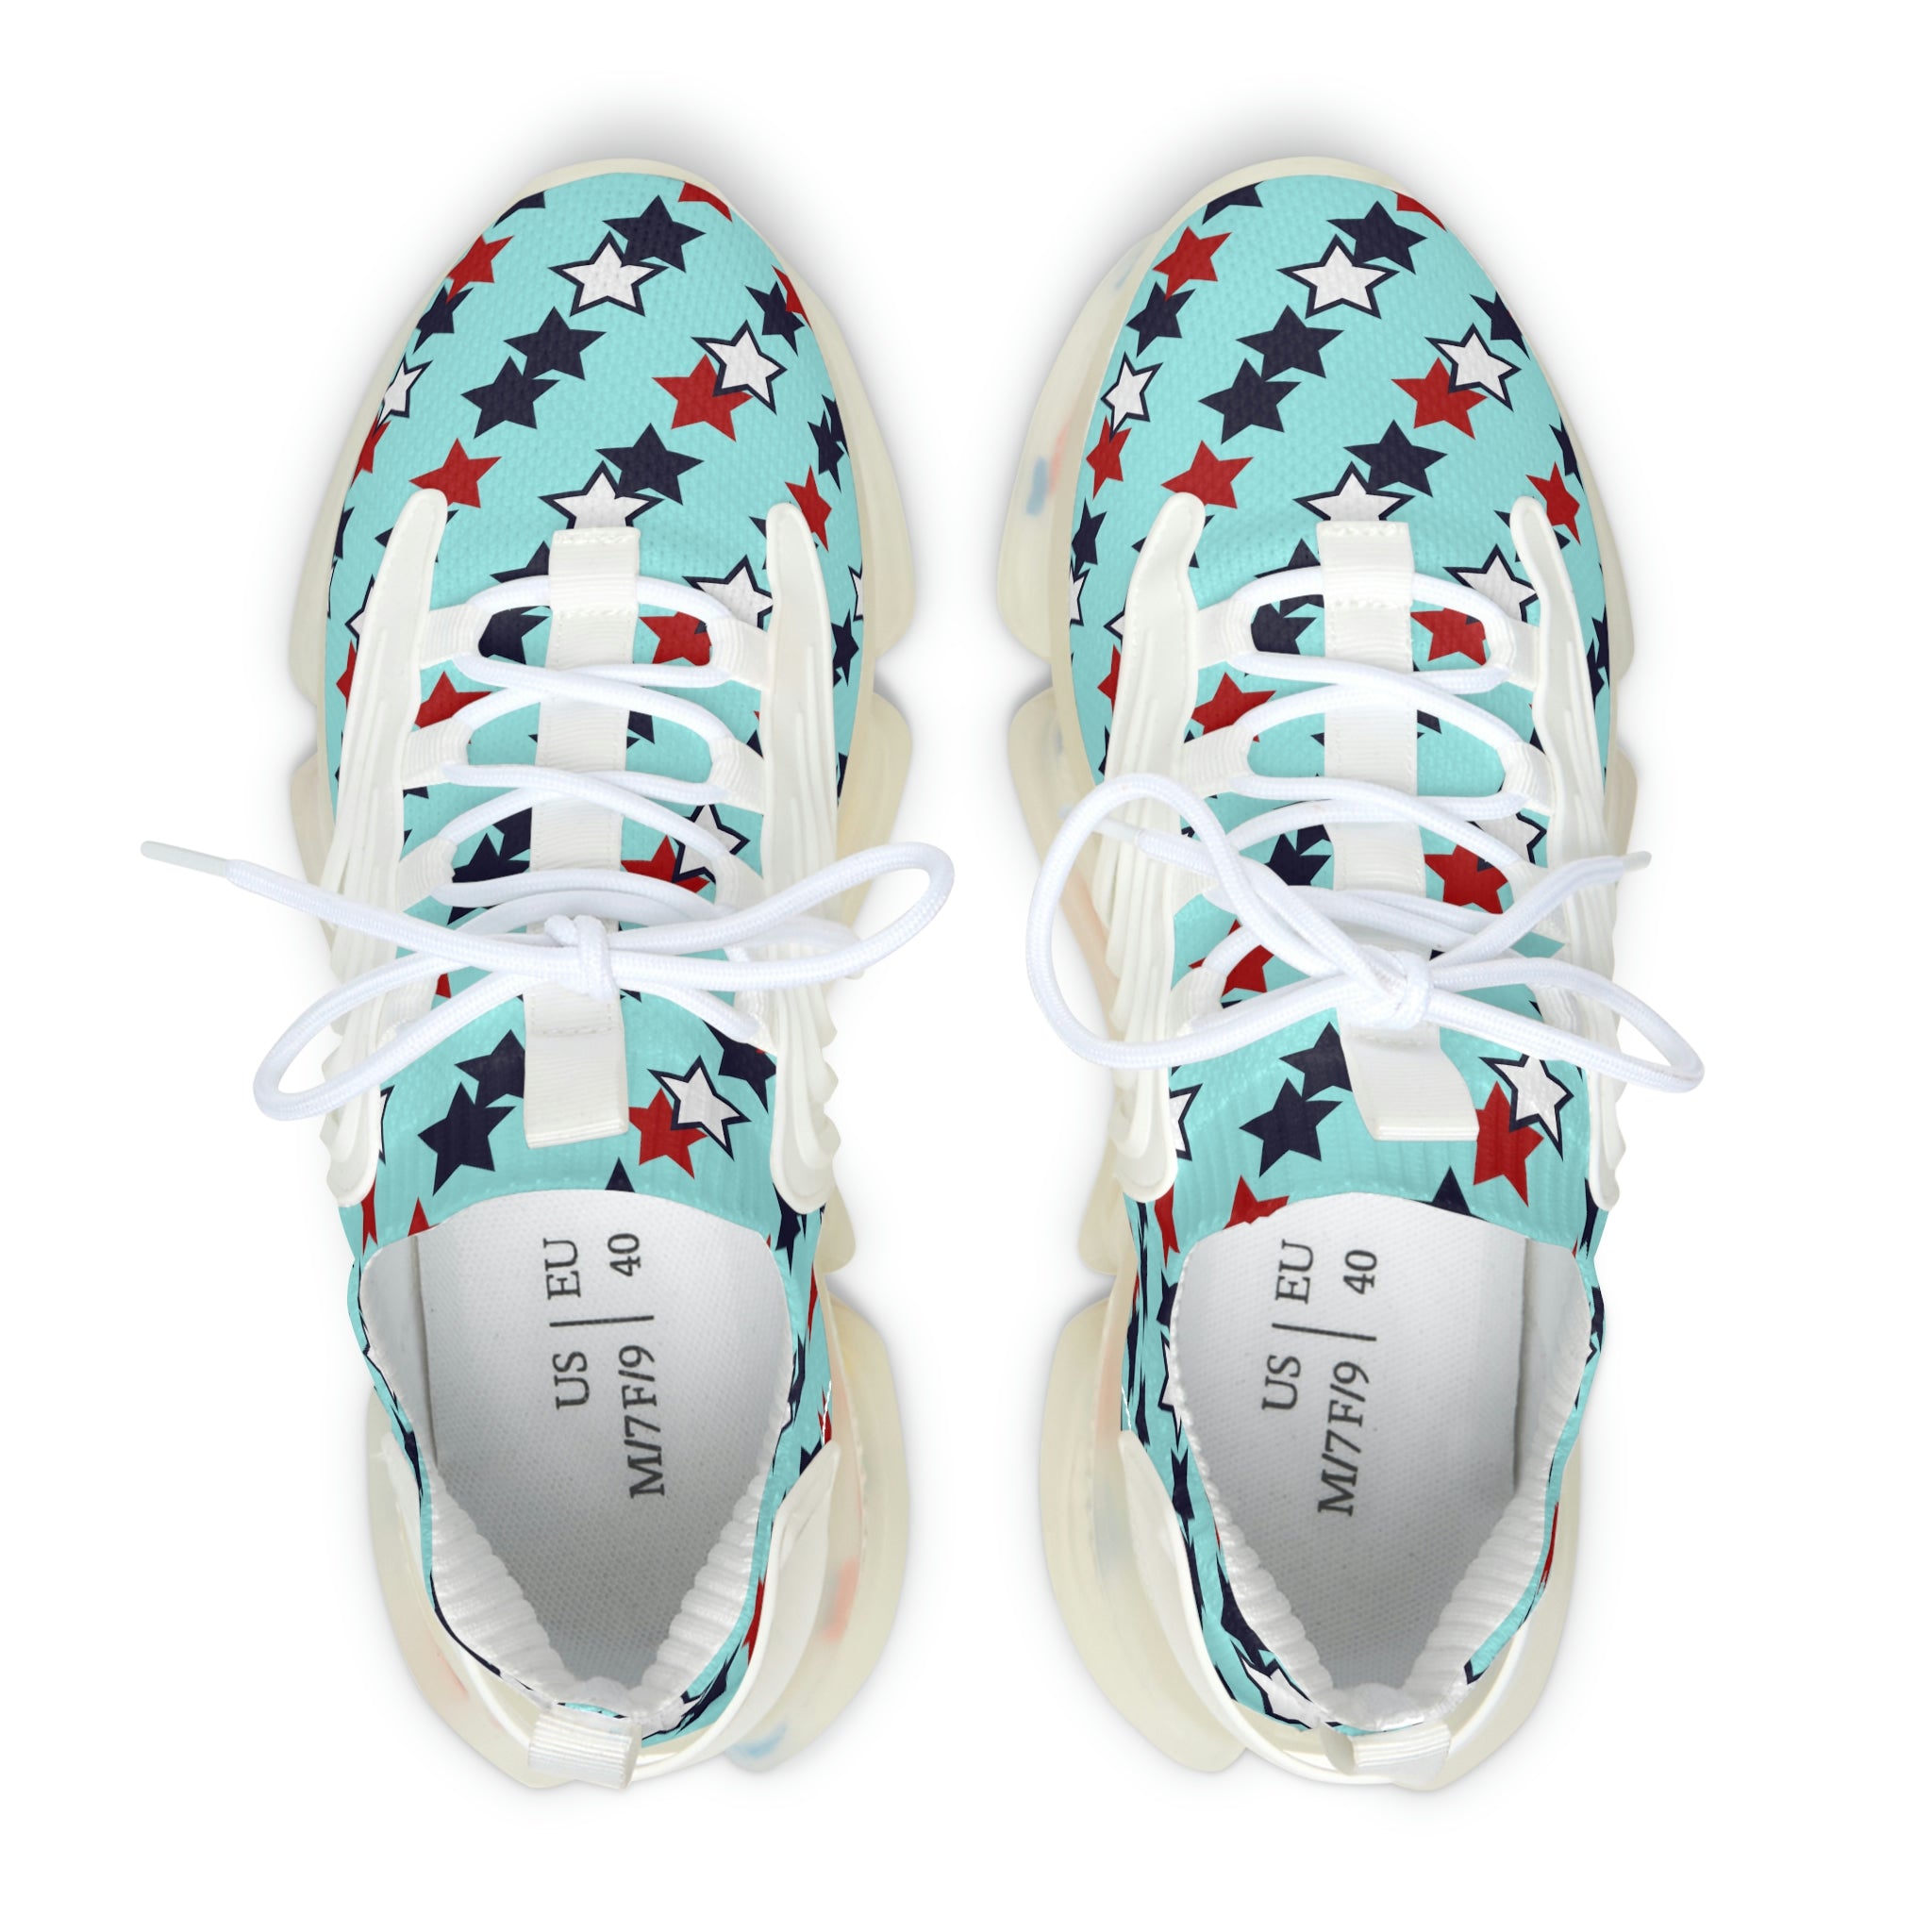 icy blue women's star print mesh knit sneakers